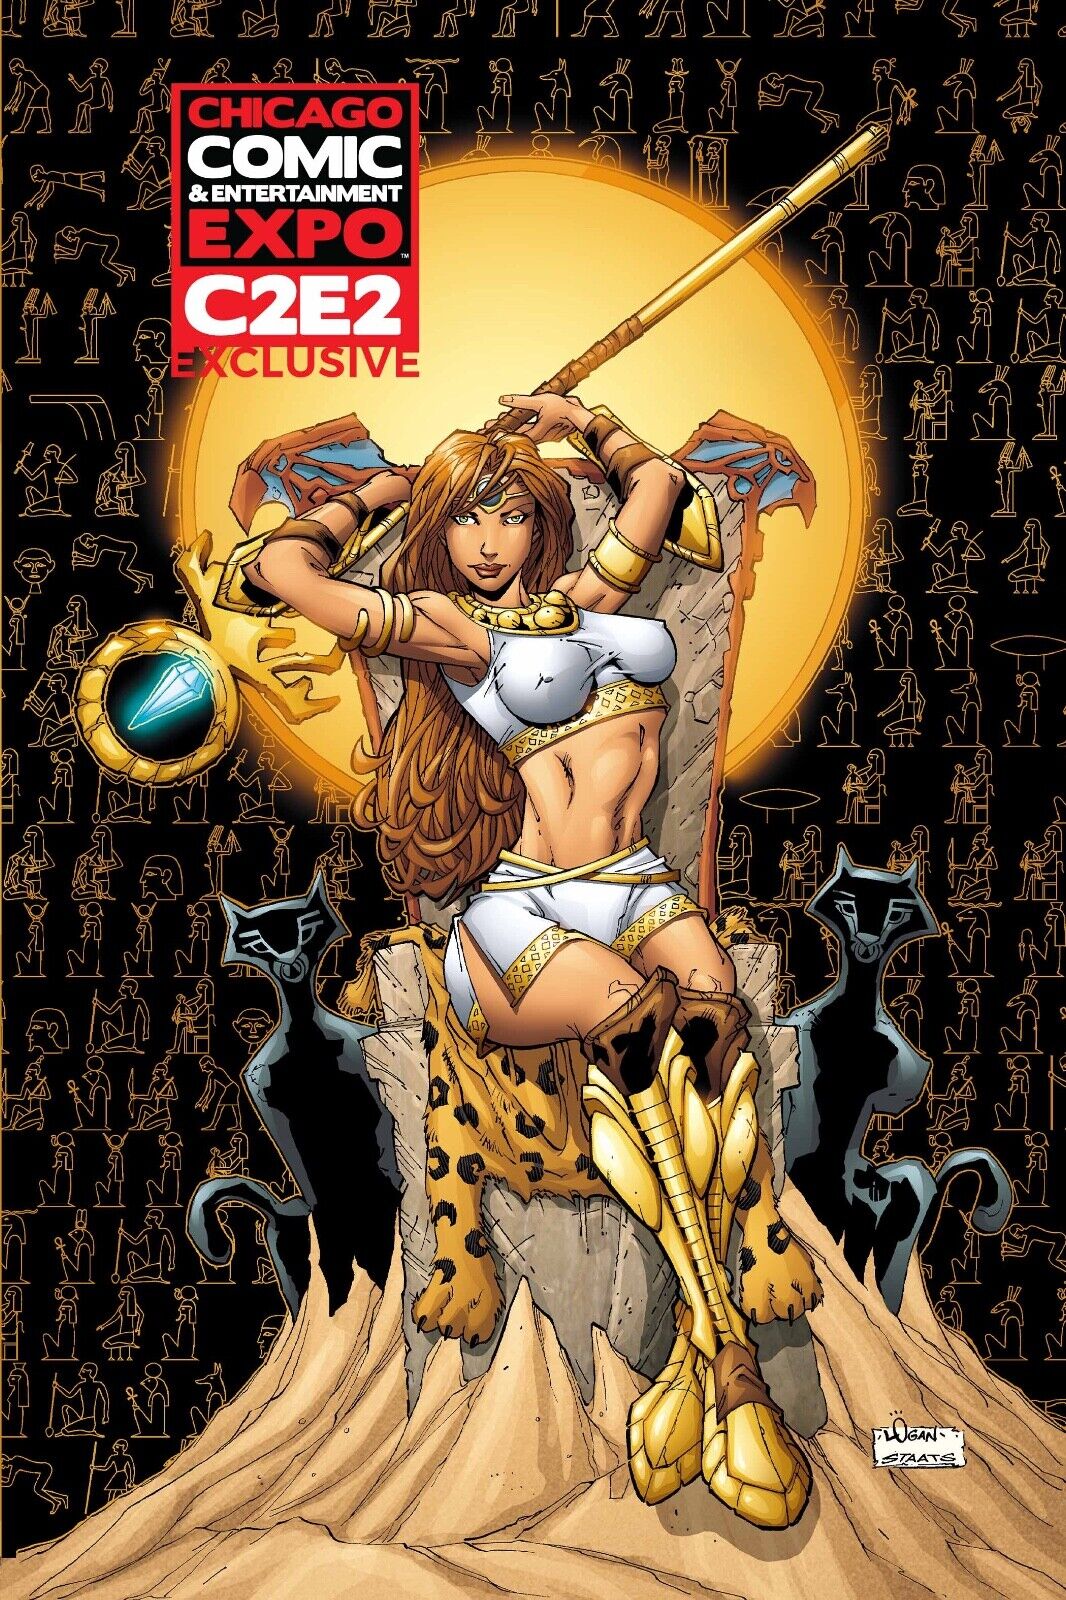 Legend of Isis C2E2 Exclusive